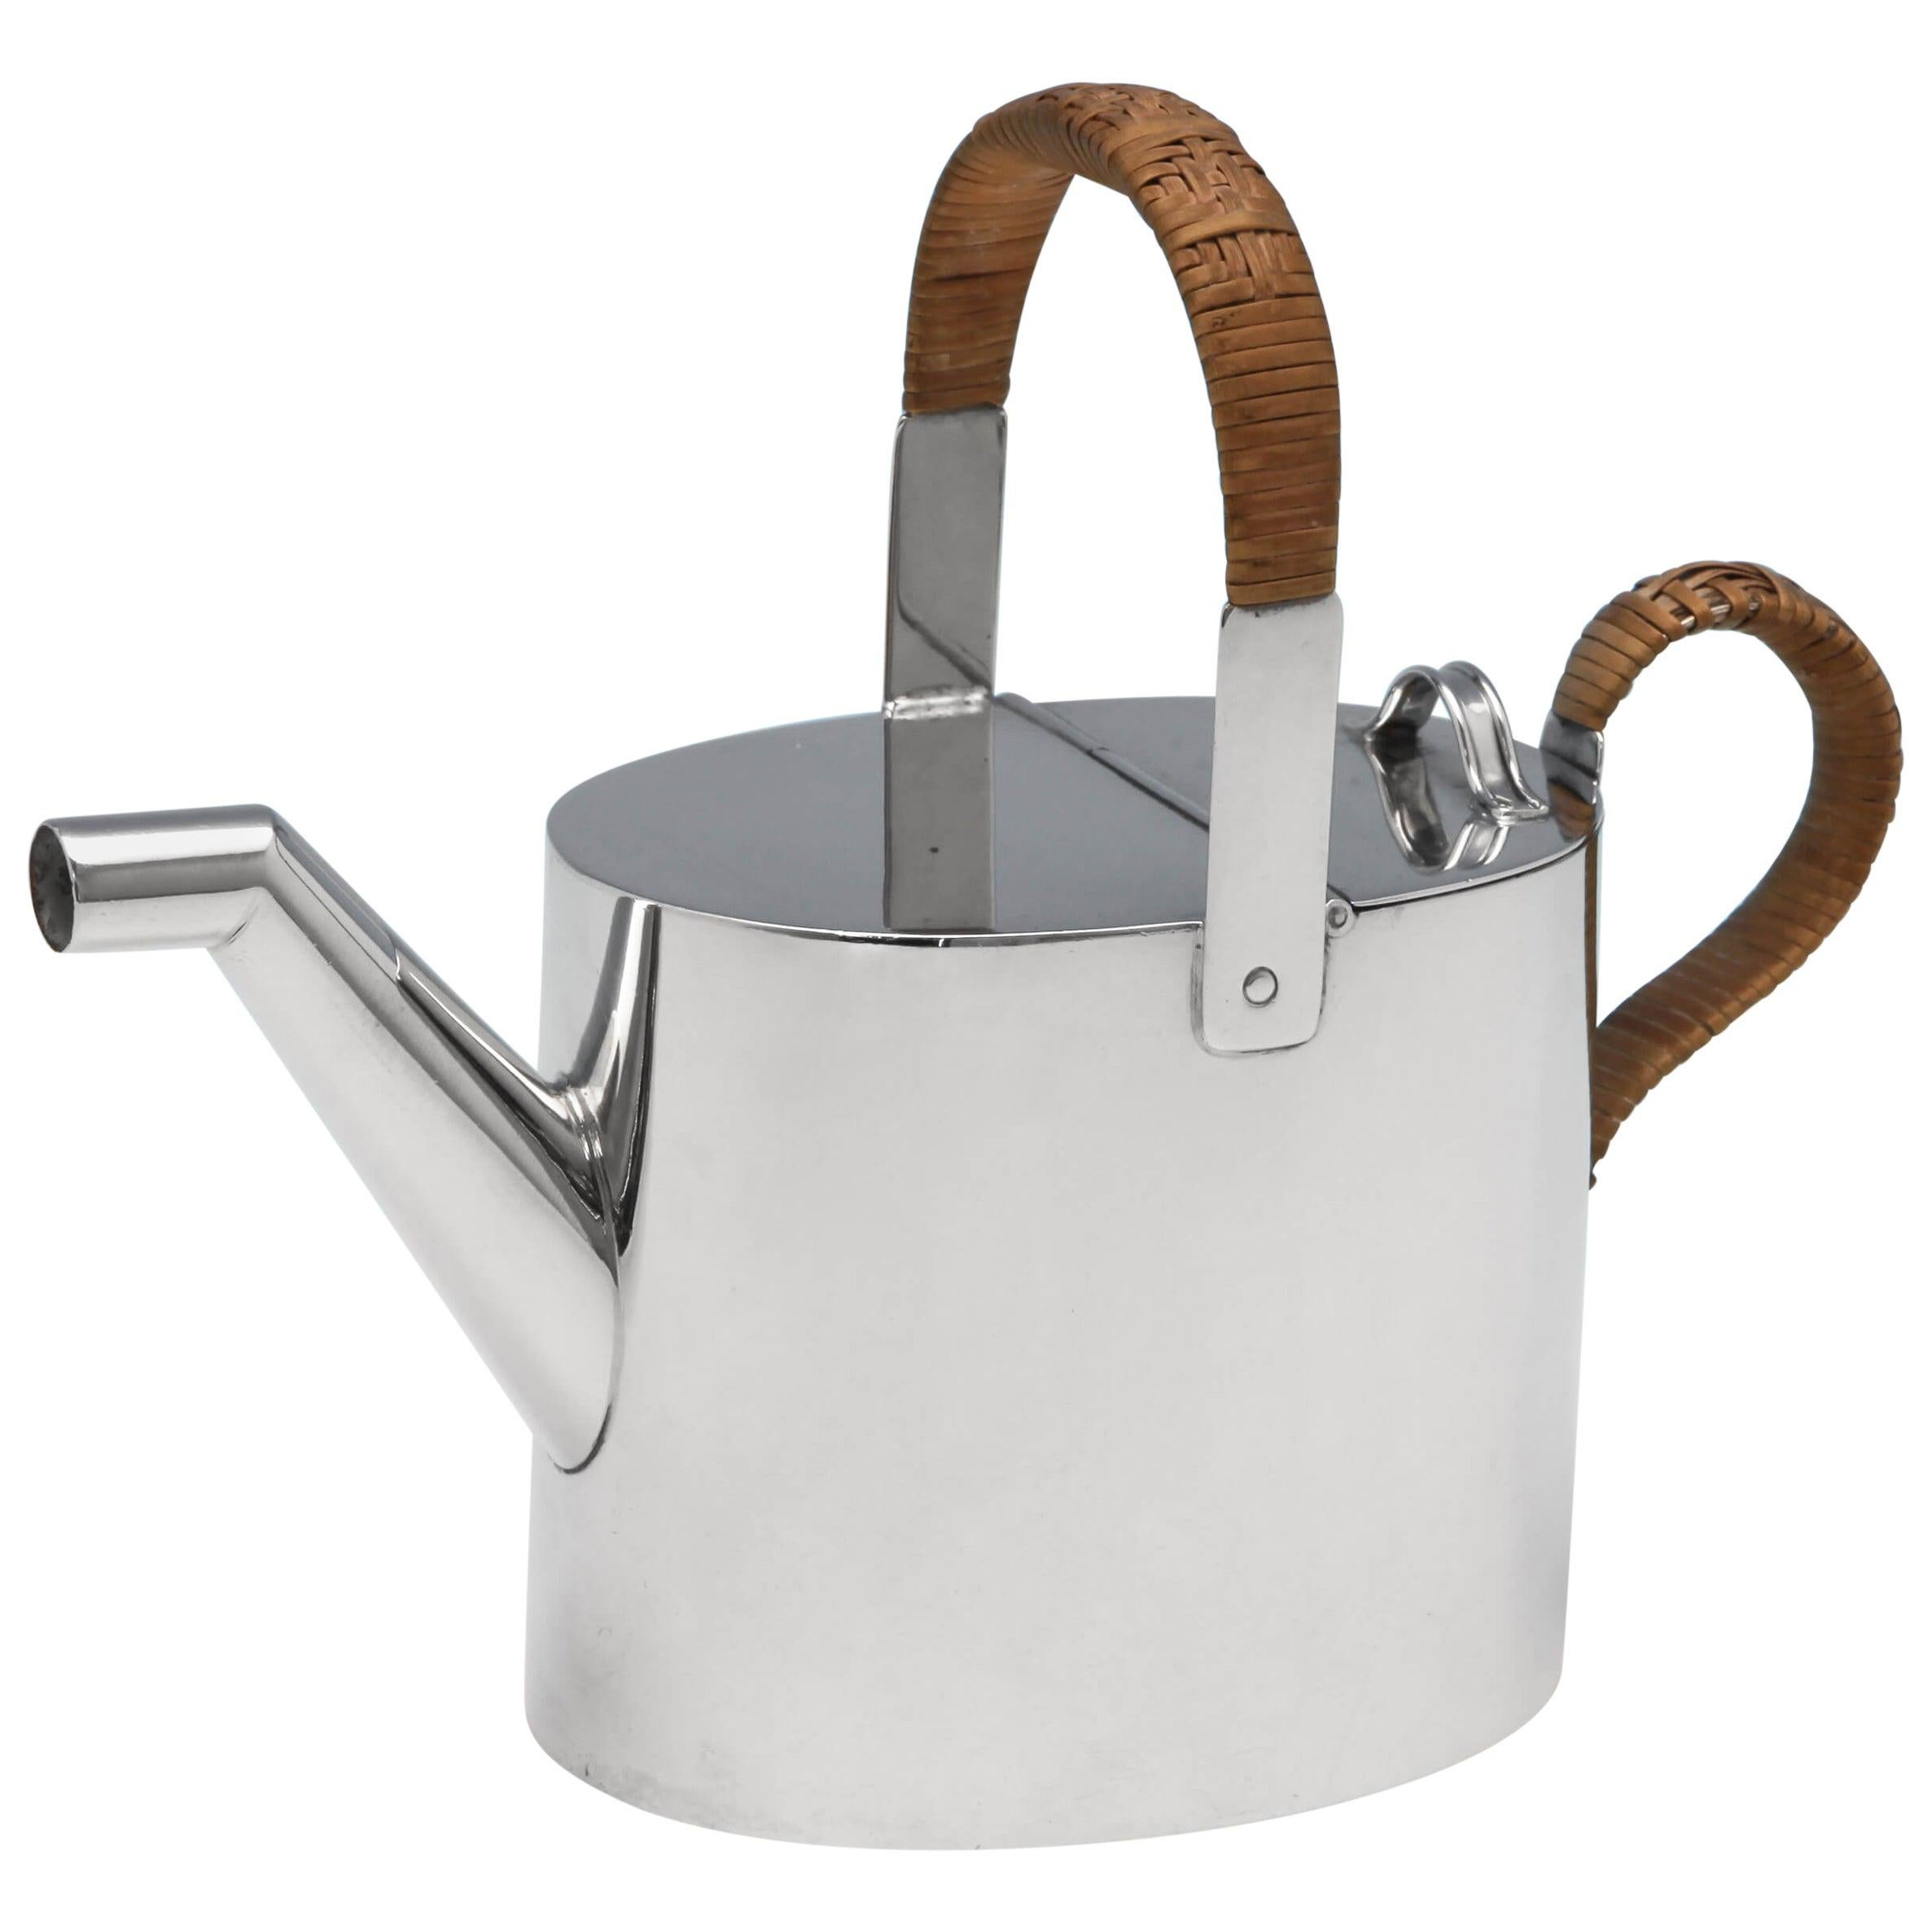 Christopher Dresser Design Sterling Silver 'Hot Water Can' by Heath & Middleton